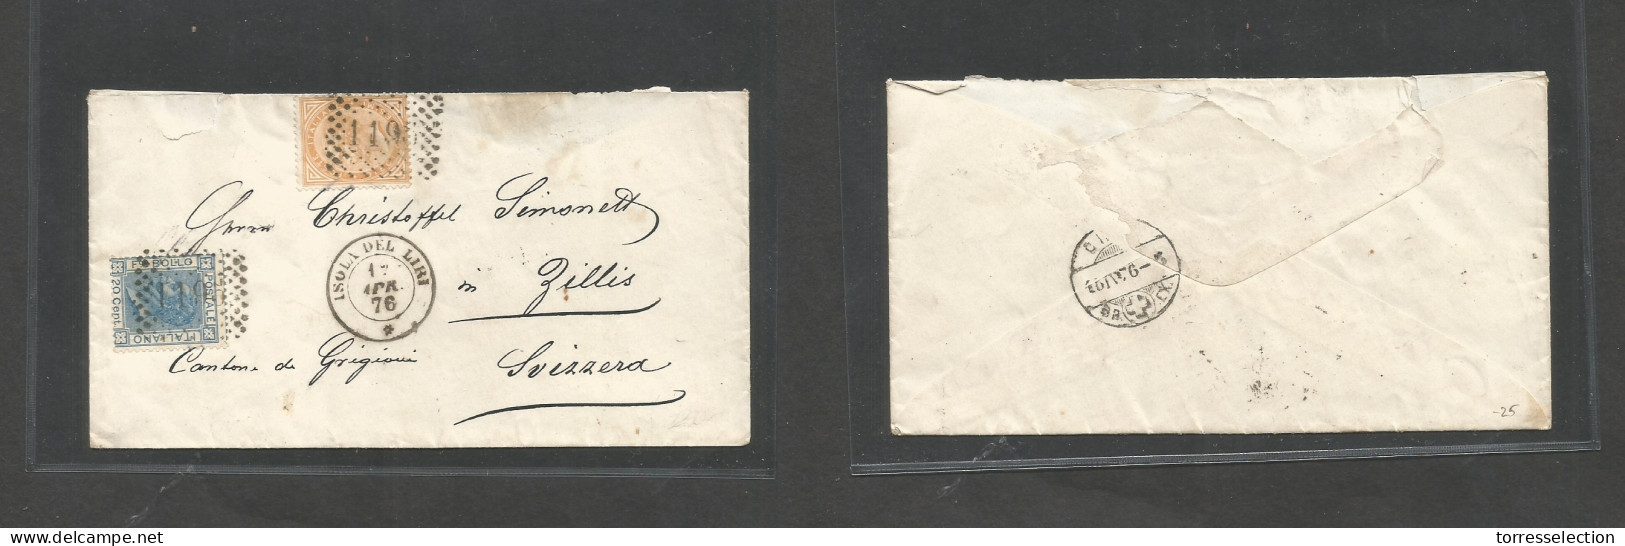 ITALY. 1876 (12 Apr) Isola Del Liri - Switzerland, Zillis, Canton Gigrioni ( Apr) Multifkd Env At C Rate. Nice Item + VF - Ohne Zuordnung